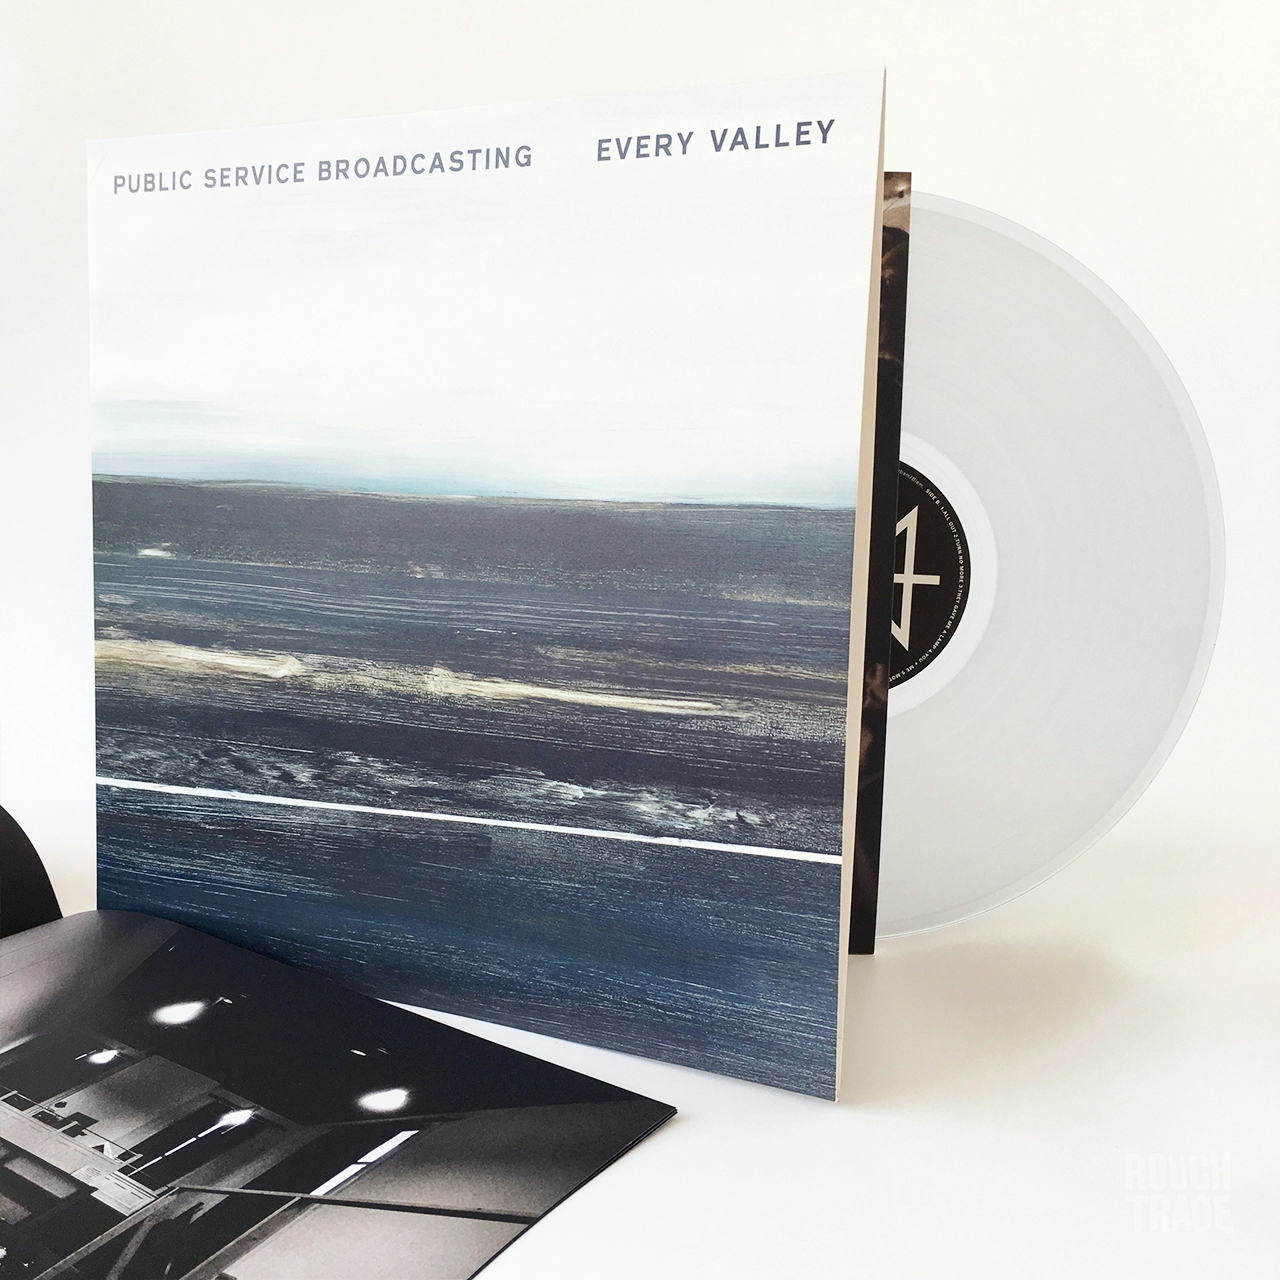 Album artwork for Album artwork for Every Valley by Public Service Broadcasting by Every Valley - Public Service Broadcasting